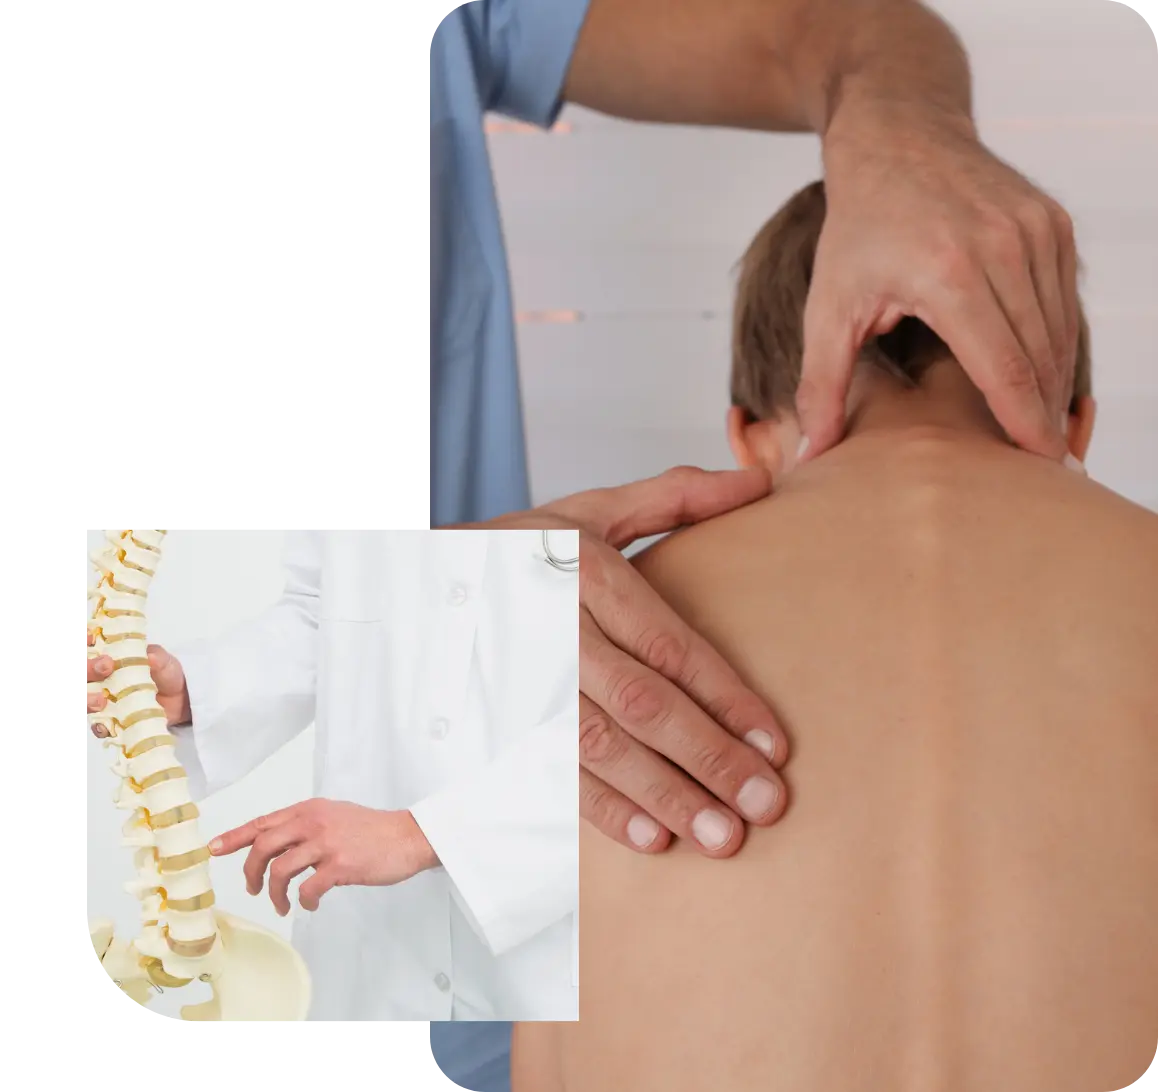 Chiropractic Care Spinal | Peak Potential Family Chiropractor